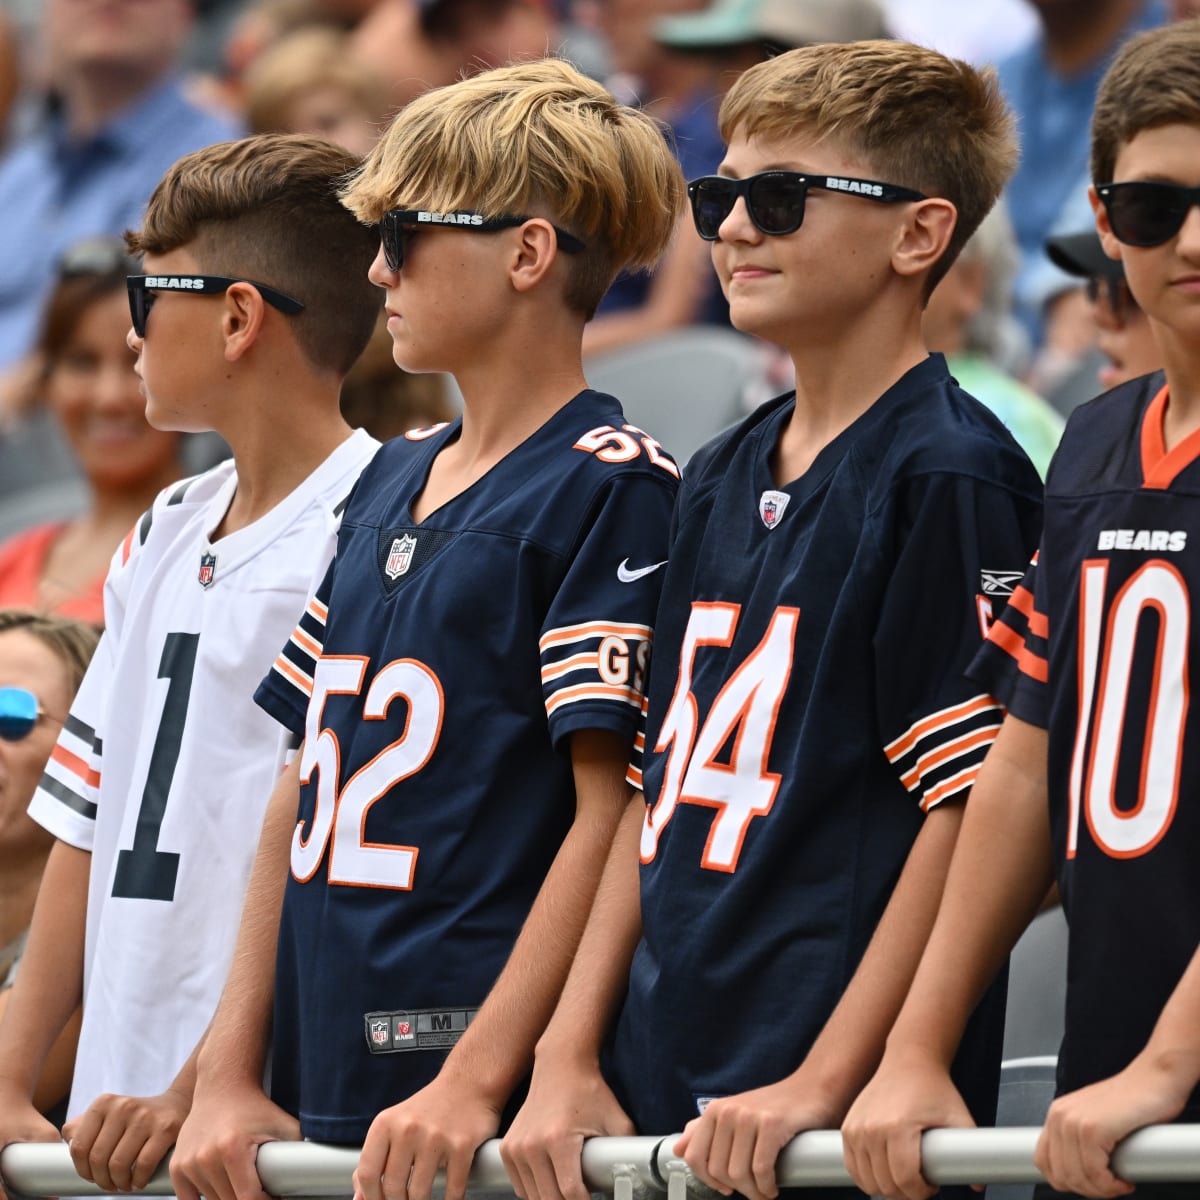 sell chicago bears tickets